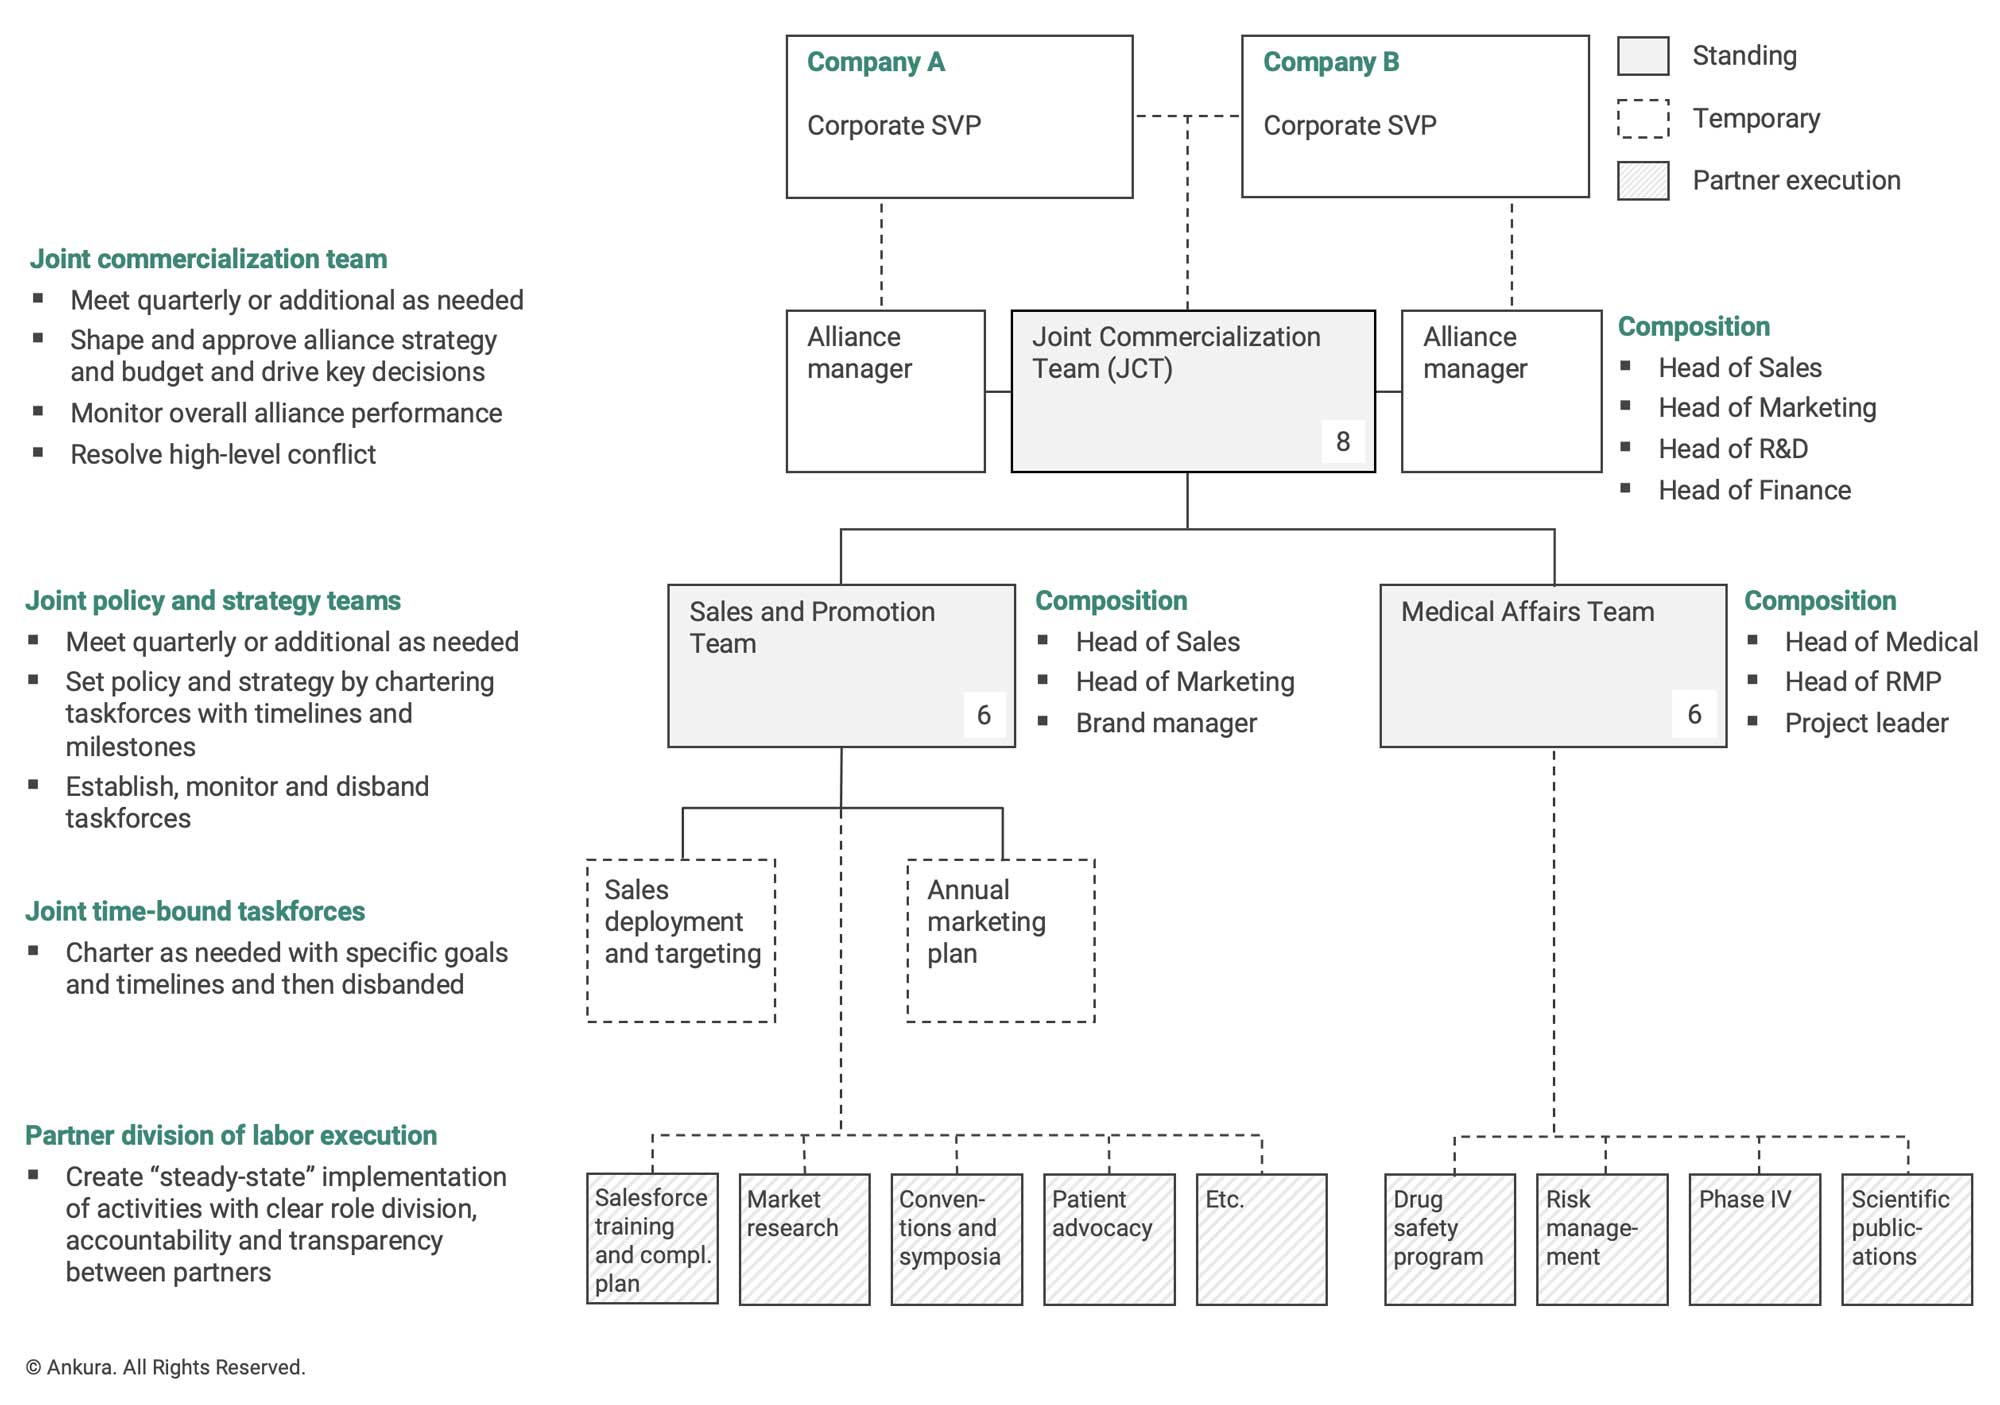 Exhibit 8: Governance Structure of Pharma Commercialization Alliance